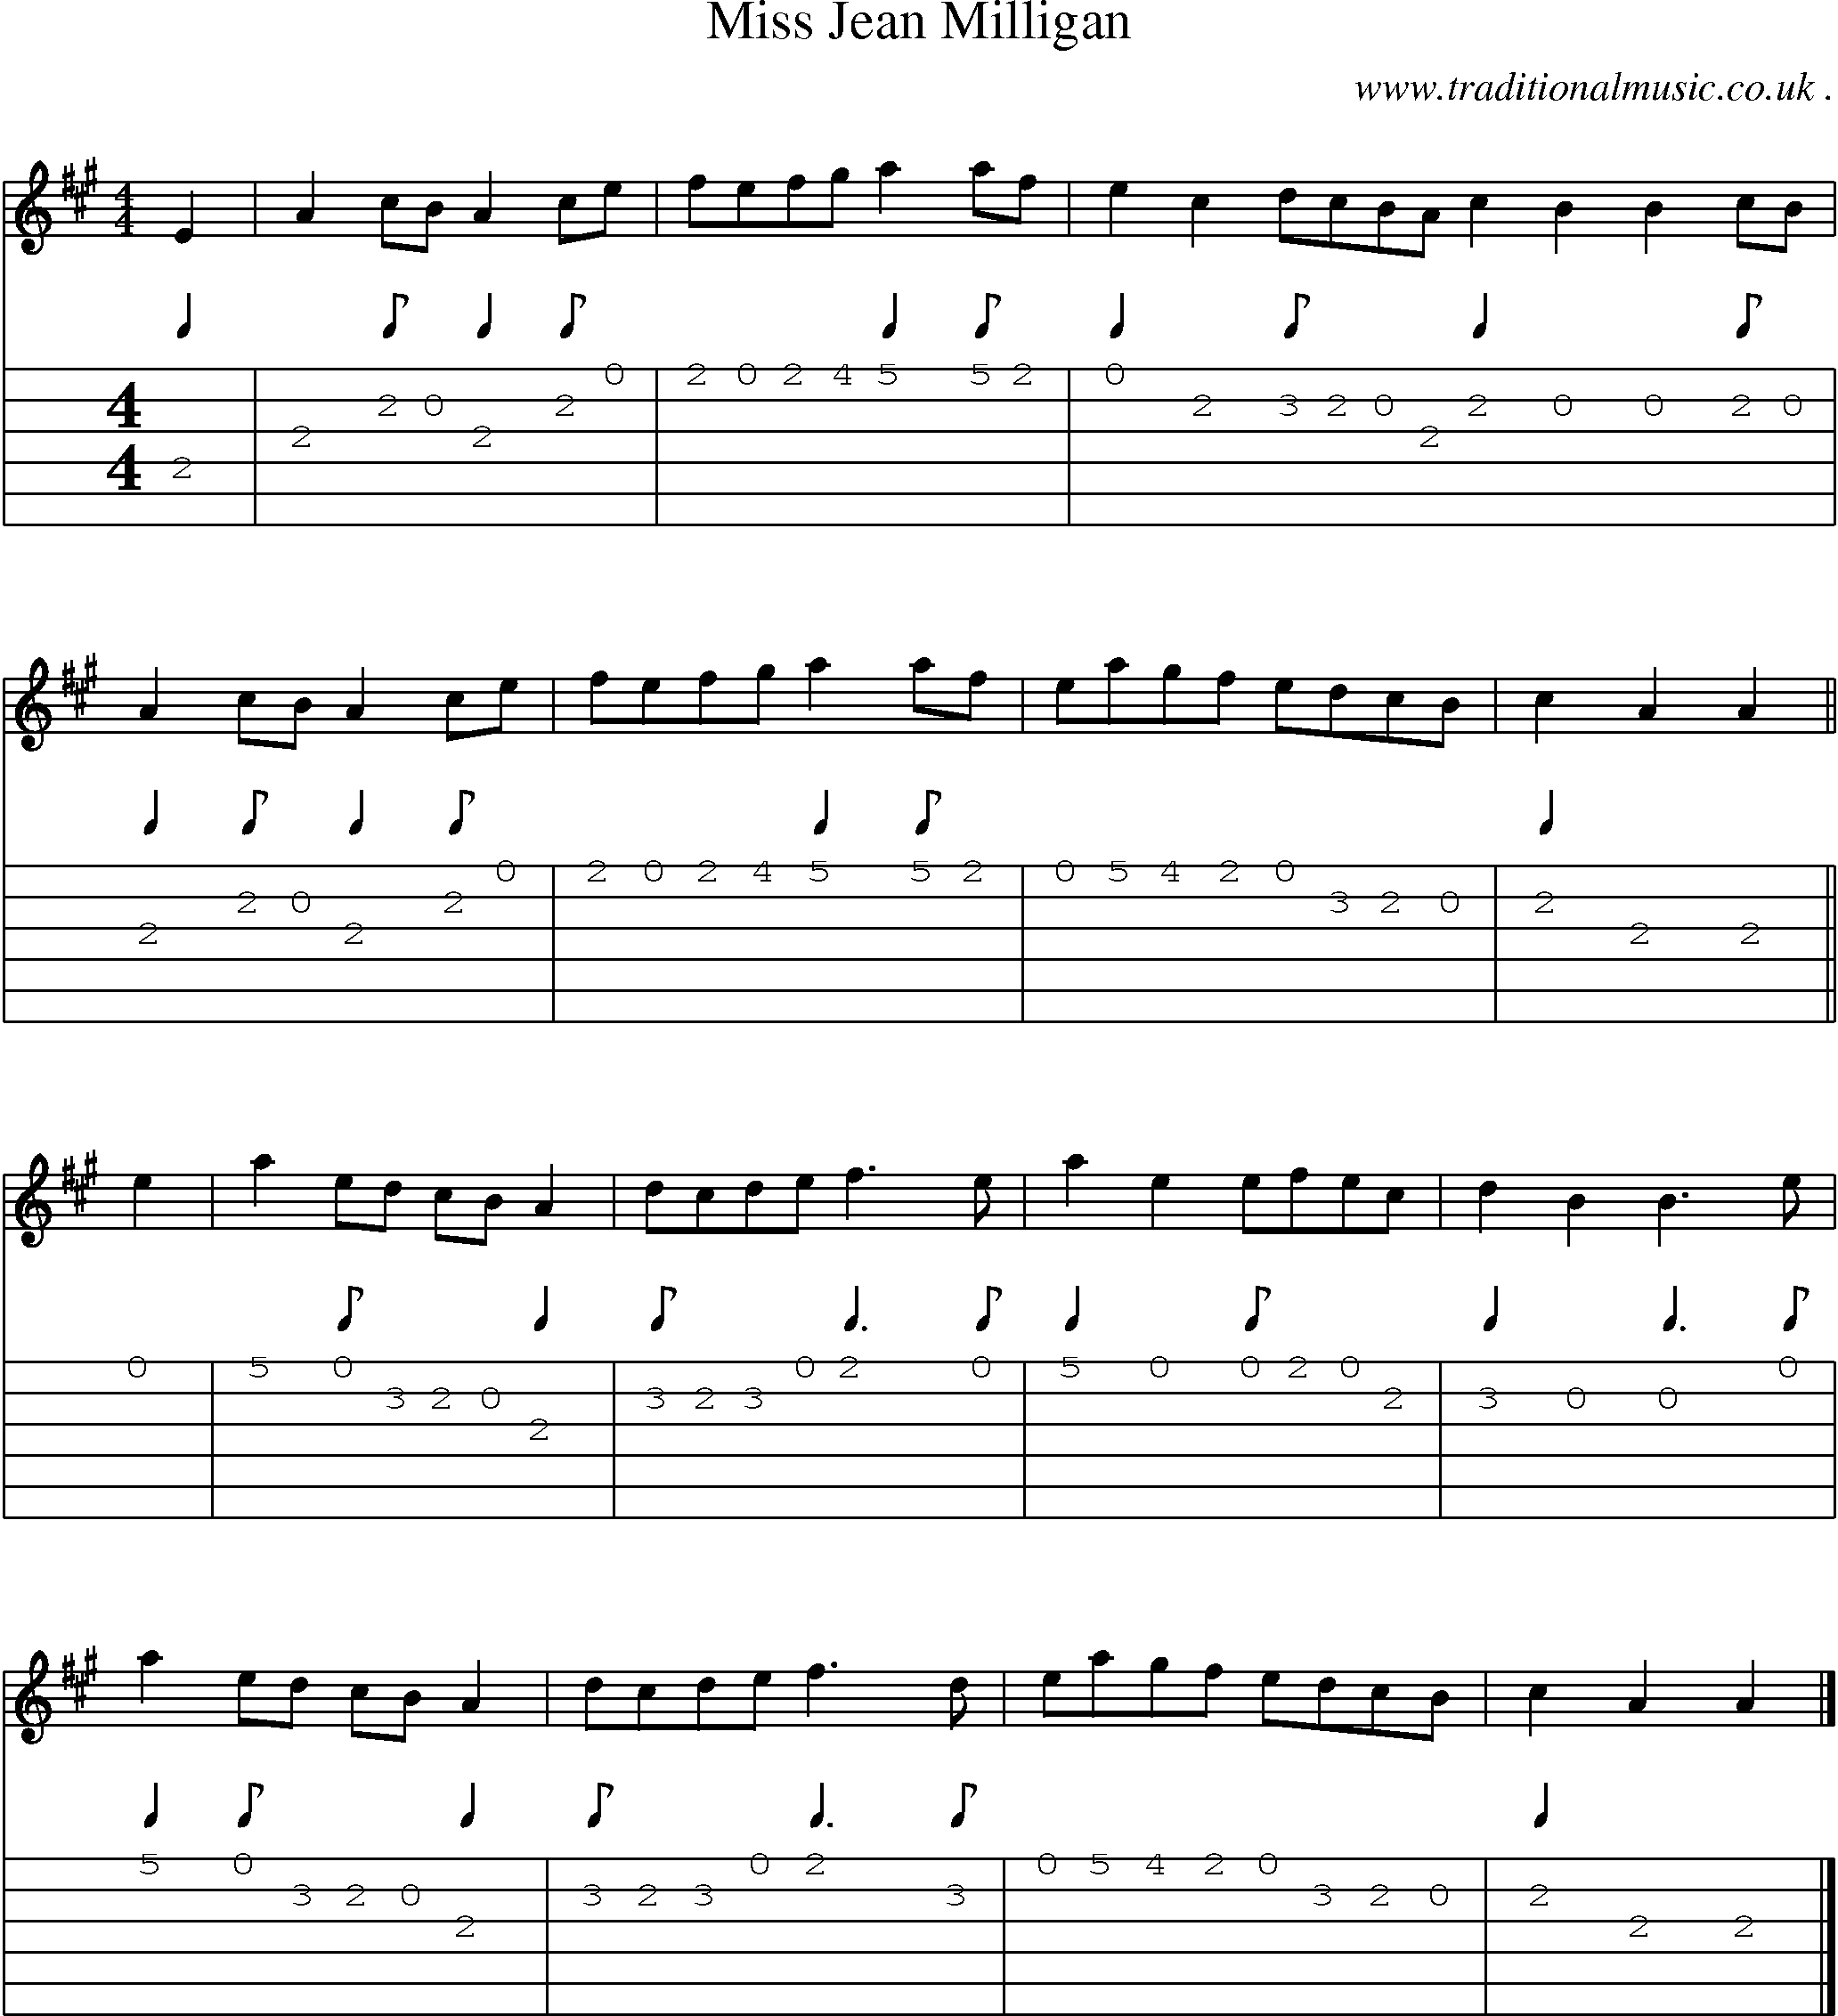 Sheet-music  score, Chords and Guitar Tabs for Miss Jean Milligan